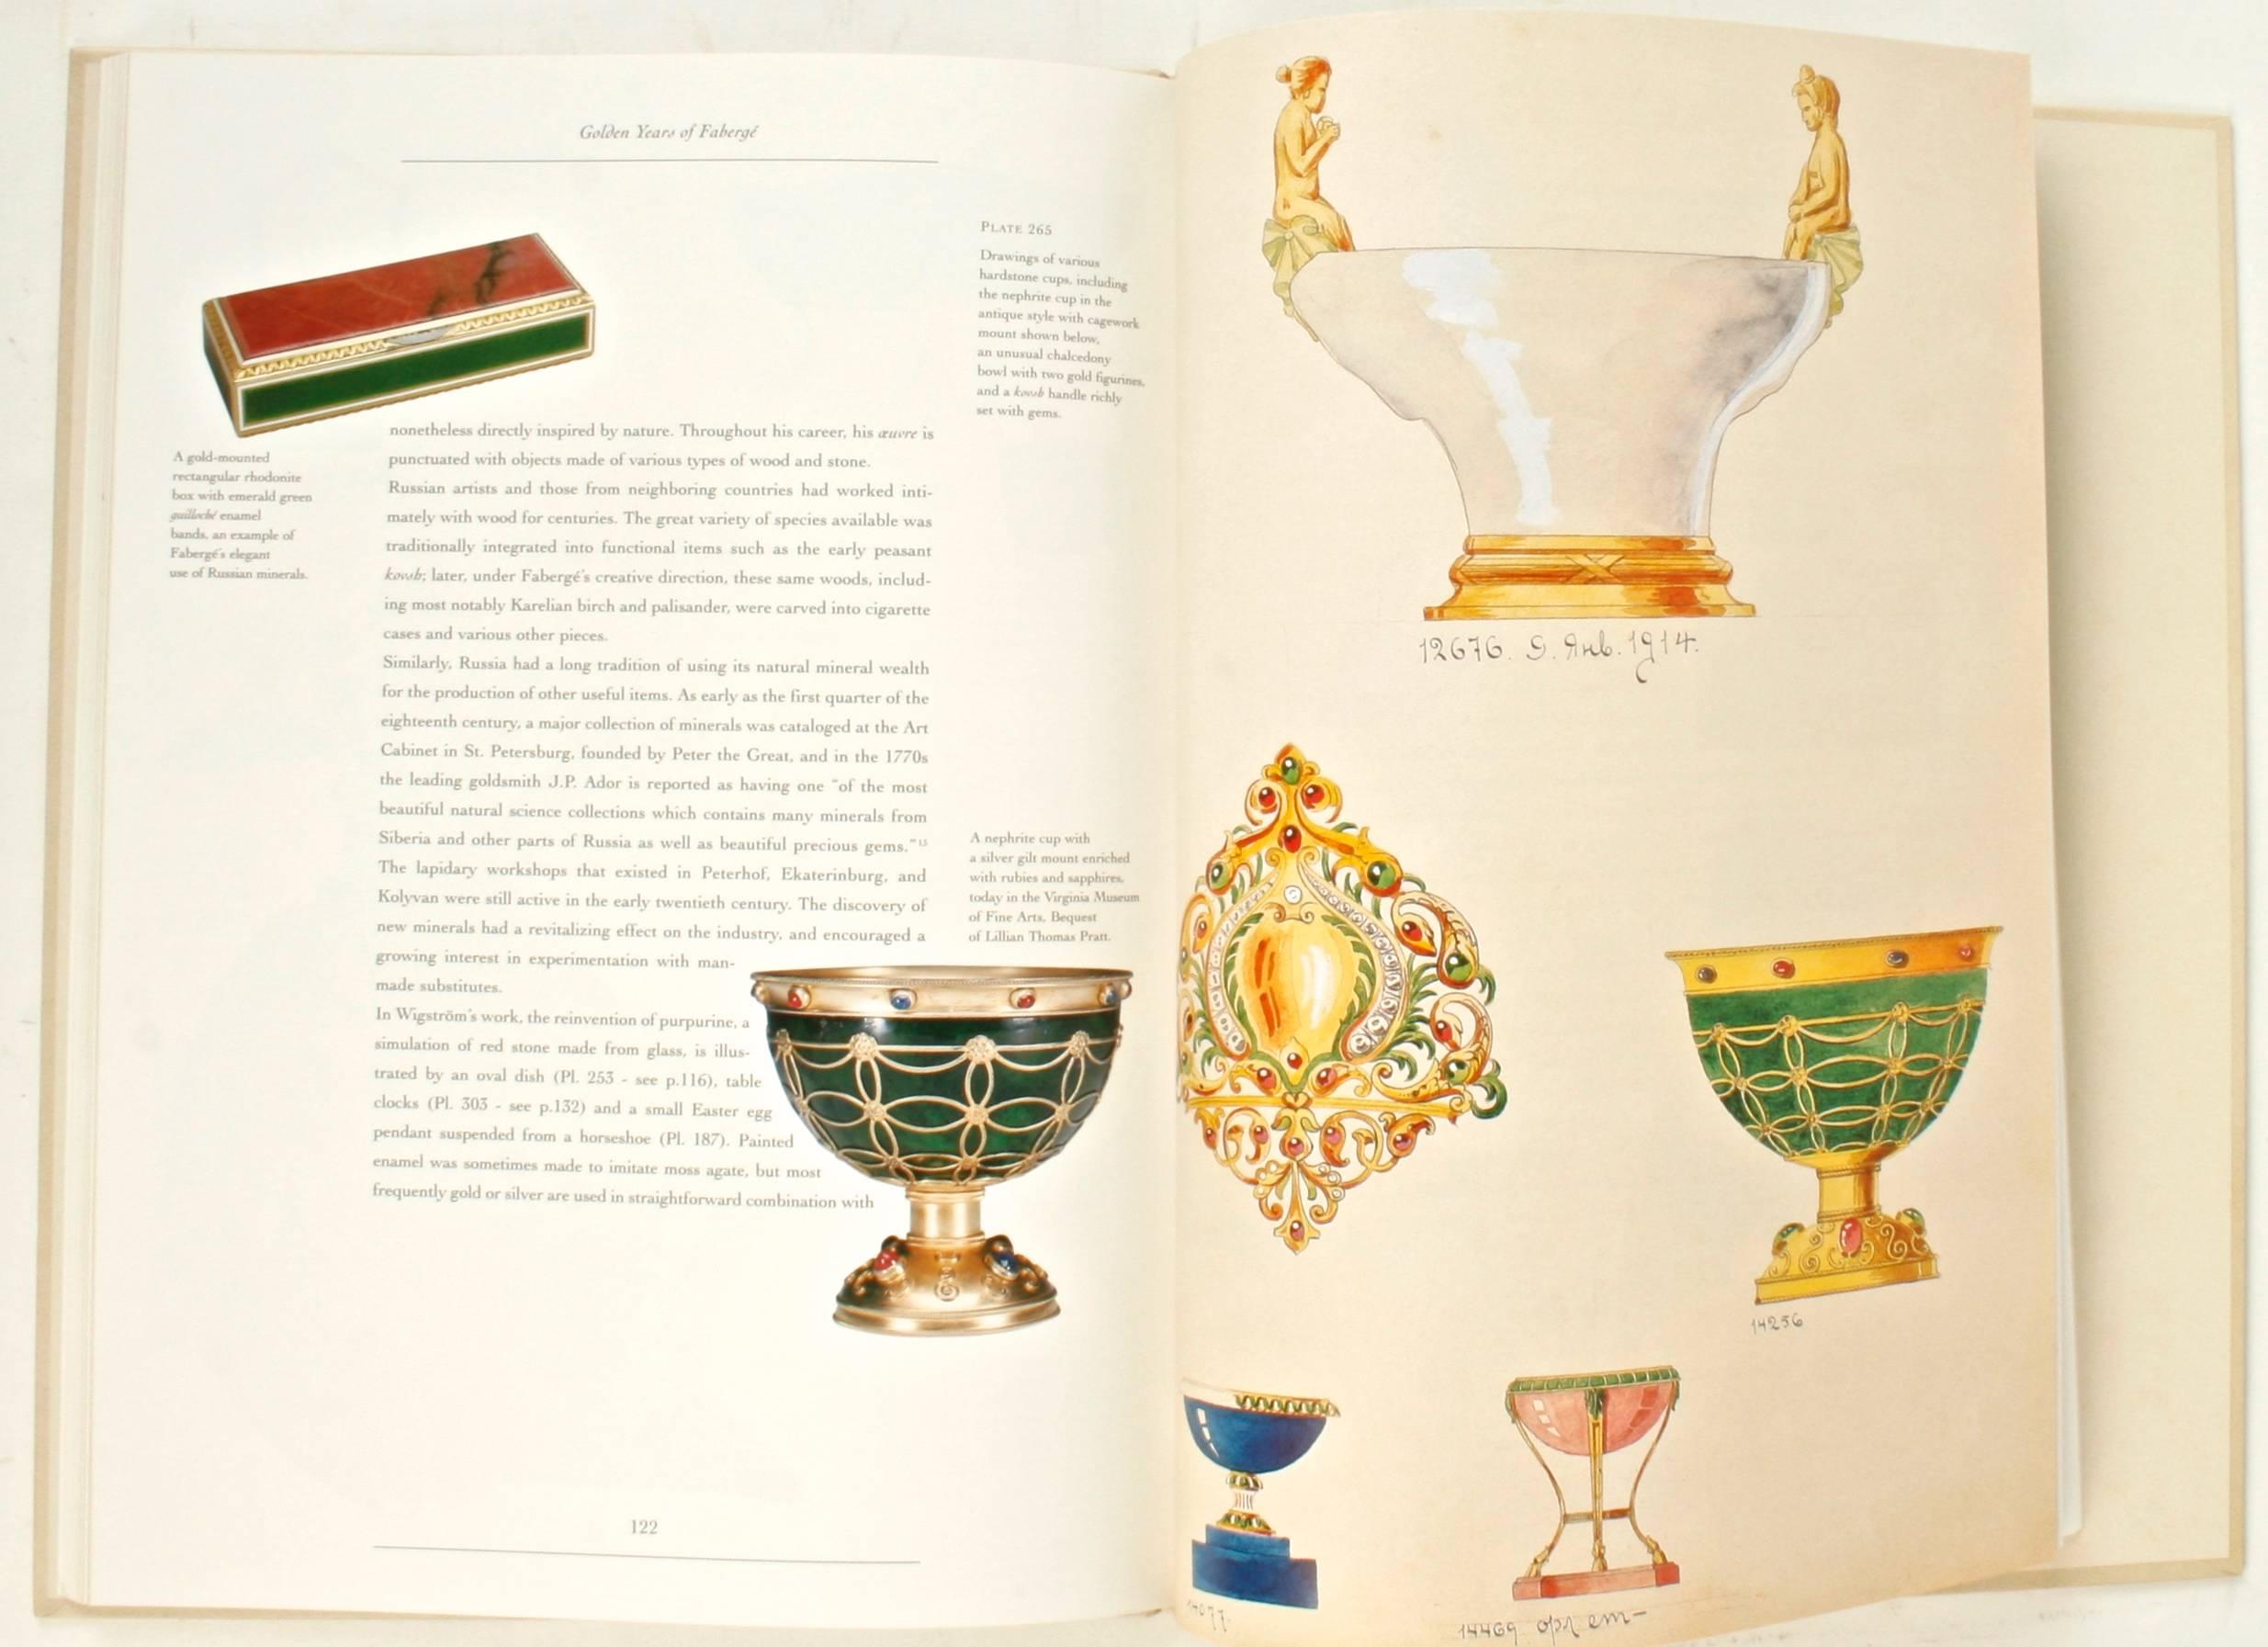 Contemporary Golden Years of Fabergé, Drawing and Objects from the Wigstrom Workshop